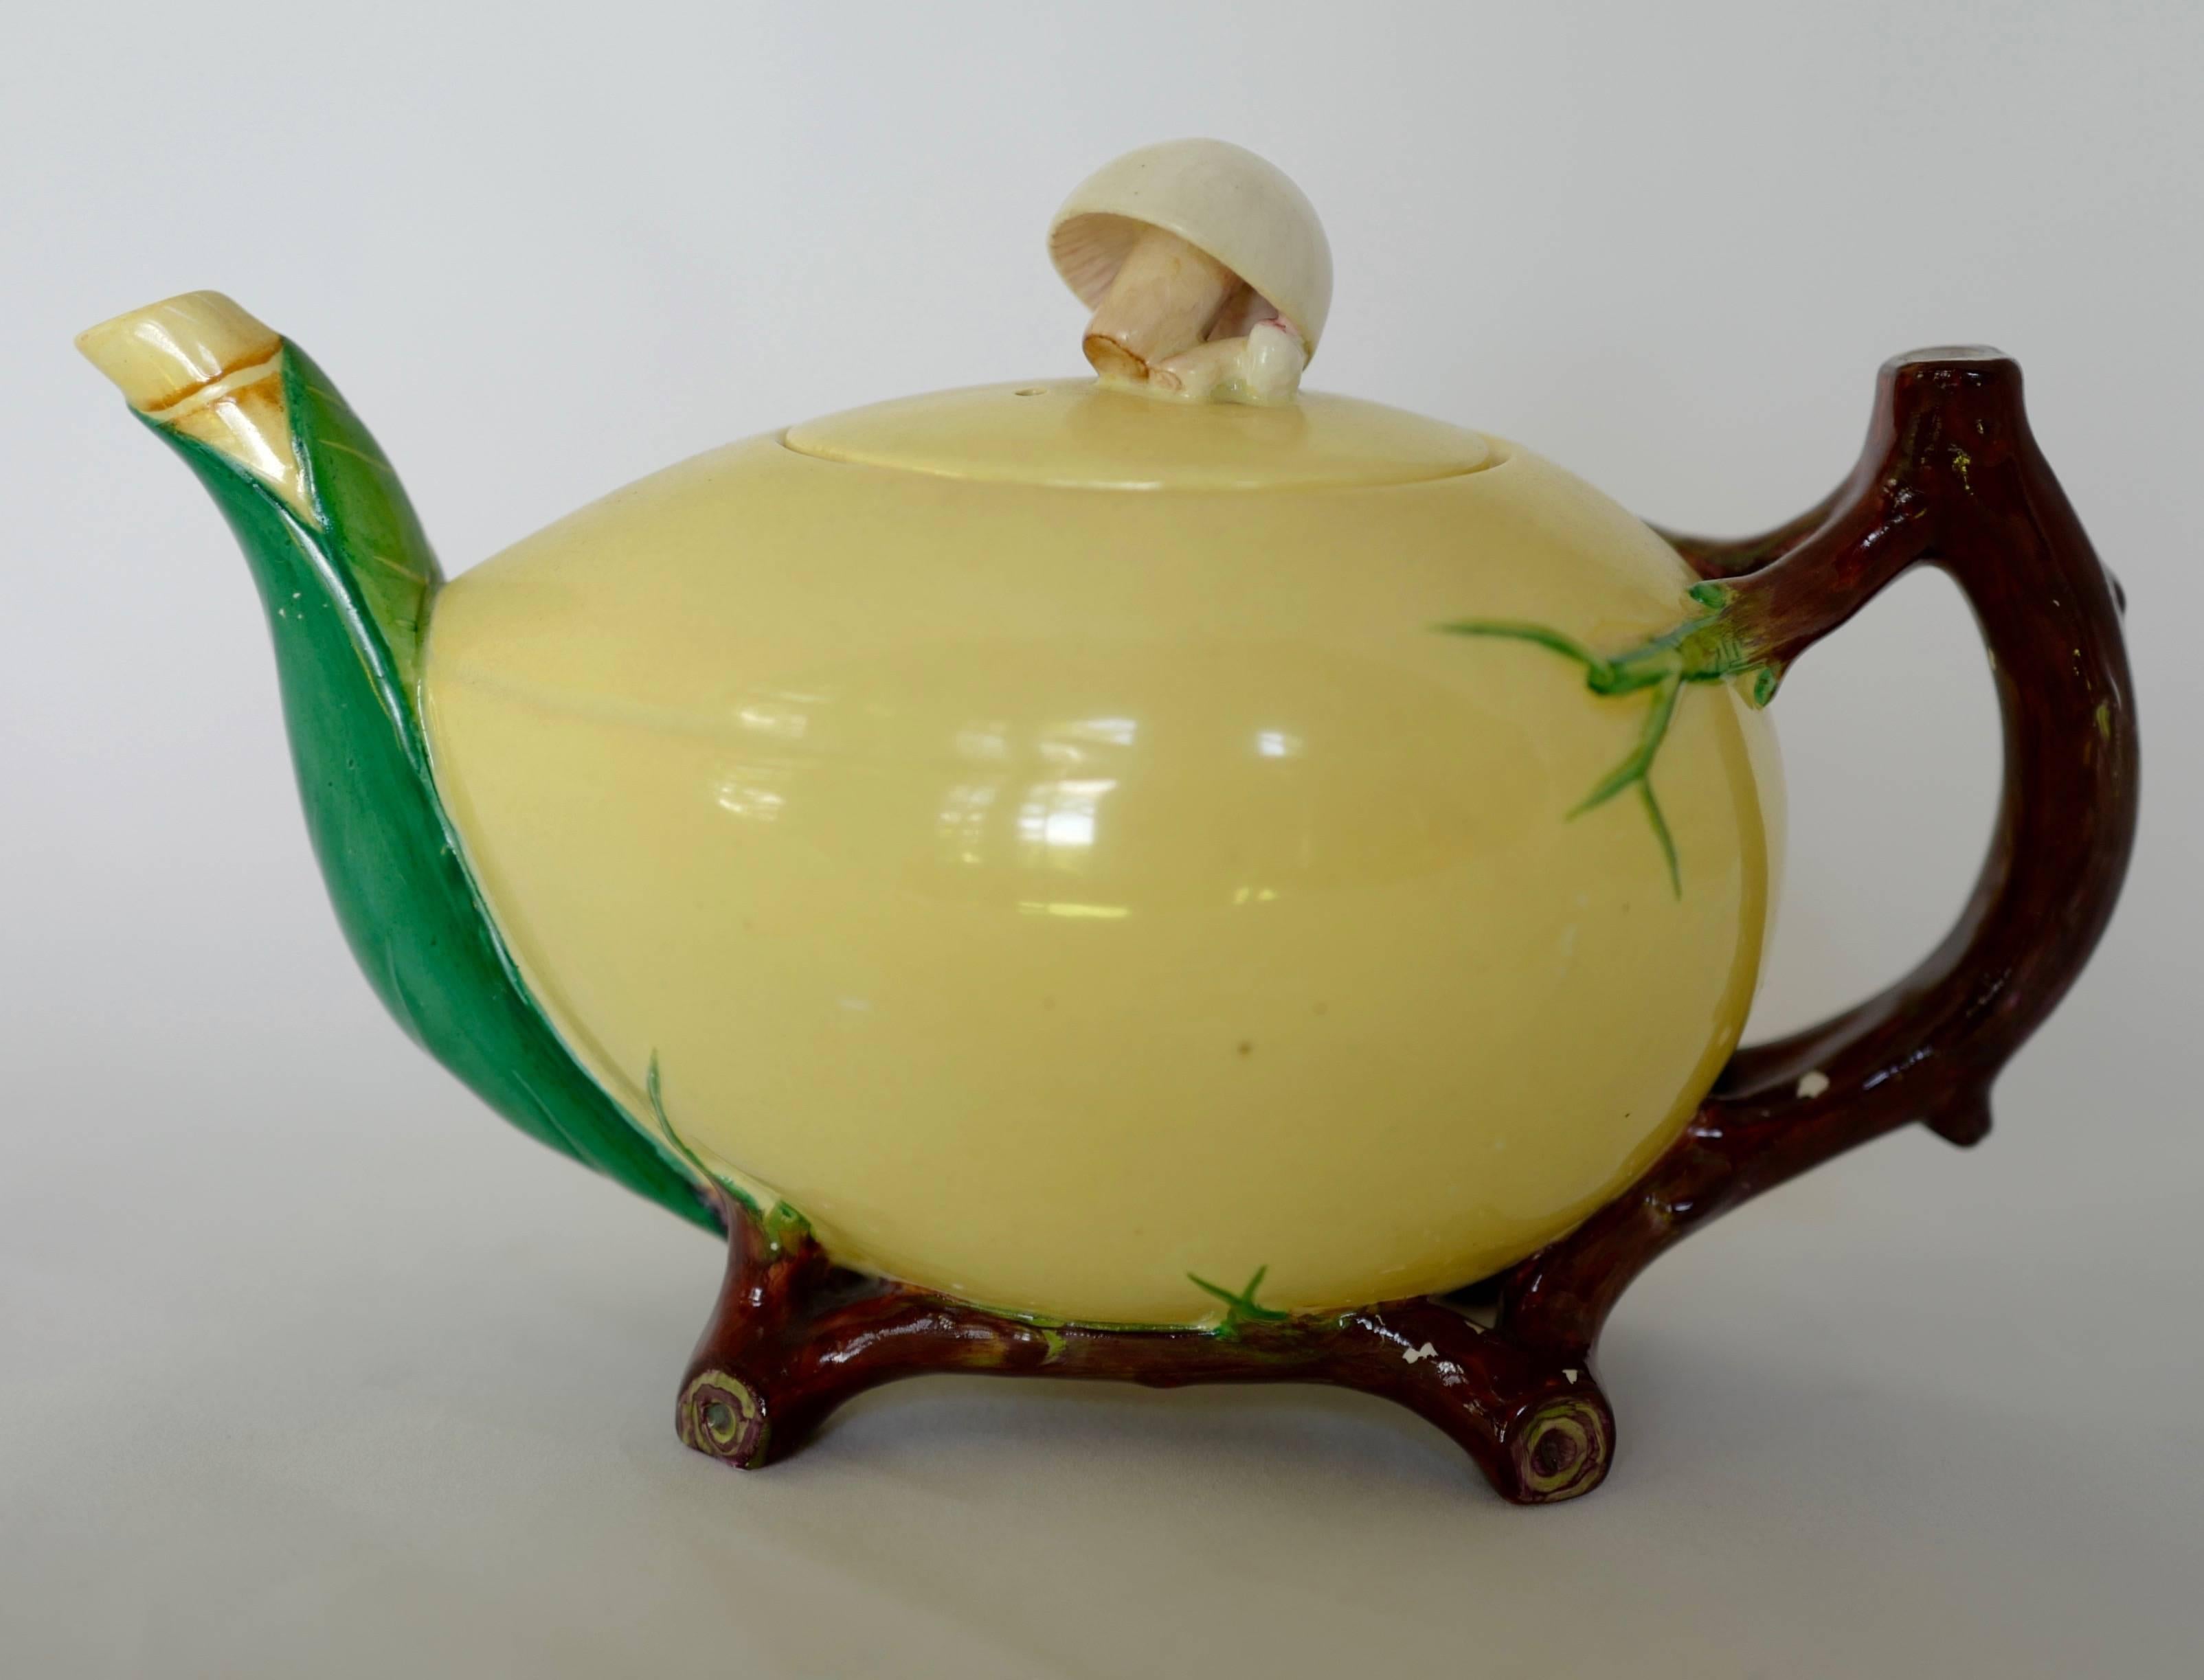 This Majolica ‘mushroom and coconut’ tea set by Minton is an extremely rare design and even rarer is finding a complete set with its original tray! 

Majolica is a 14th-15th century Italian product and refers to the colorful glazes used on